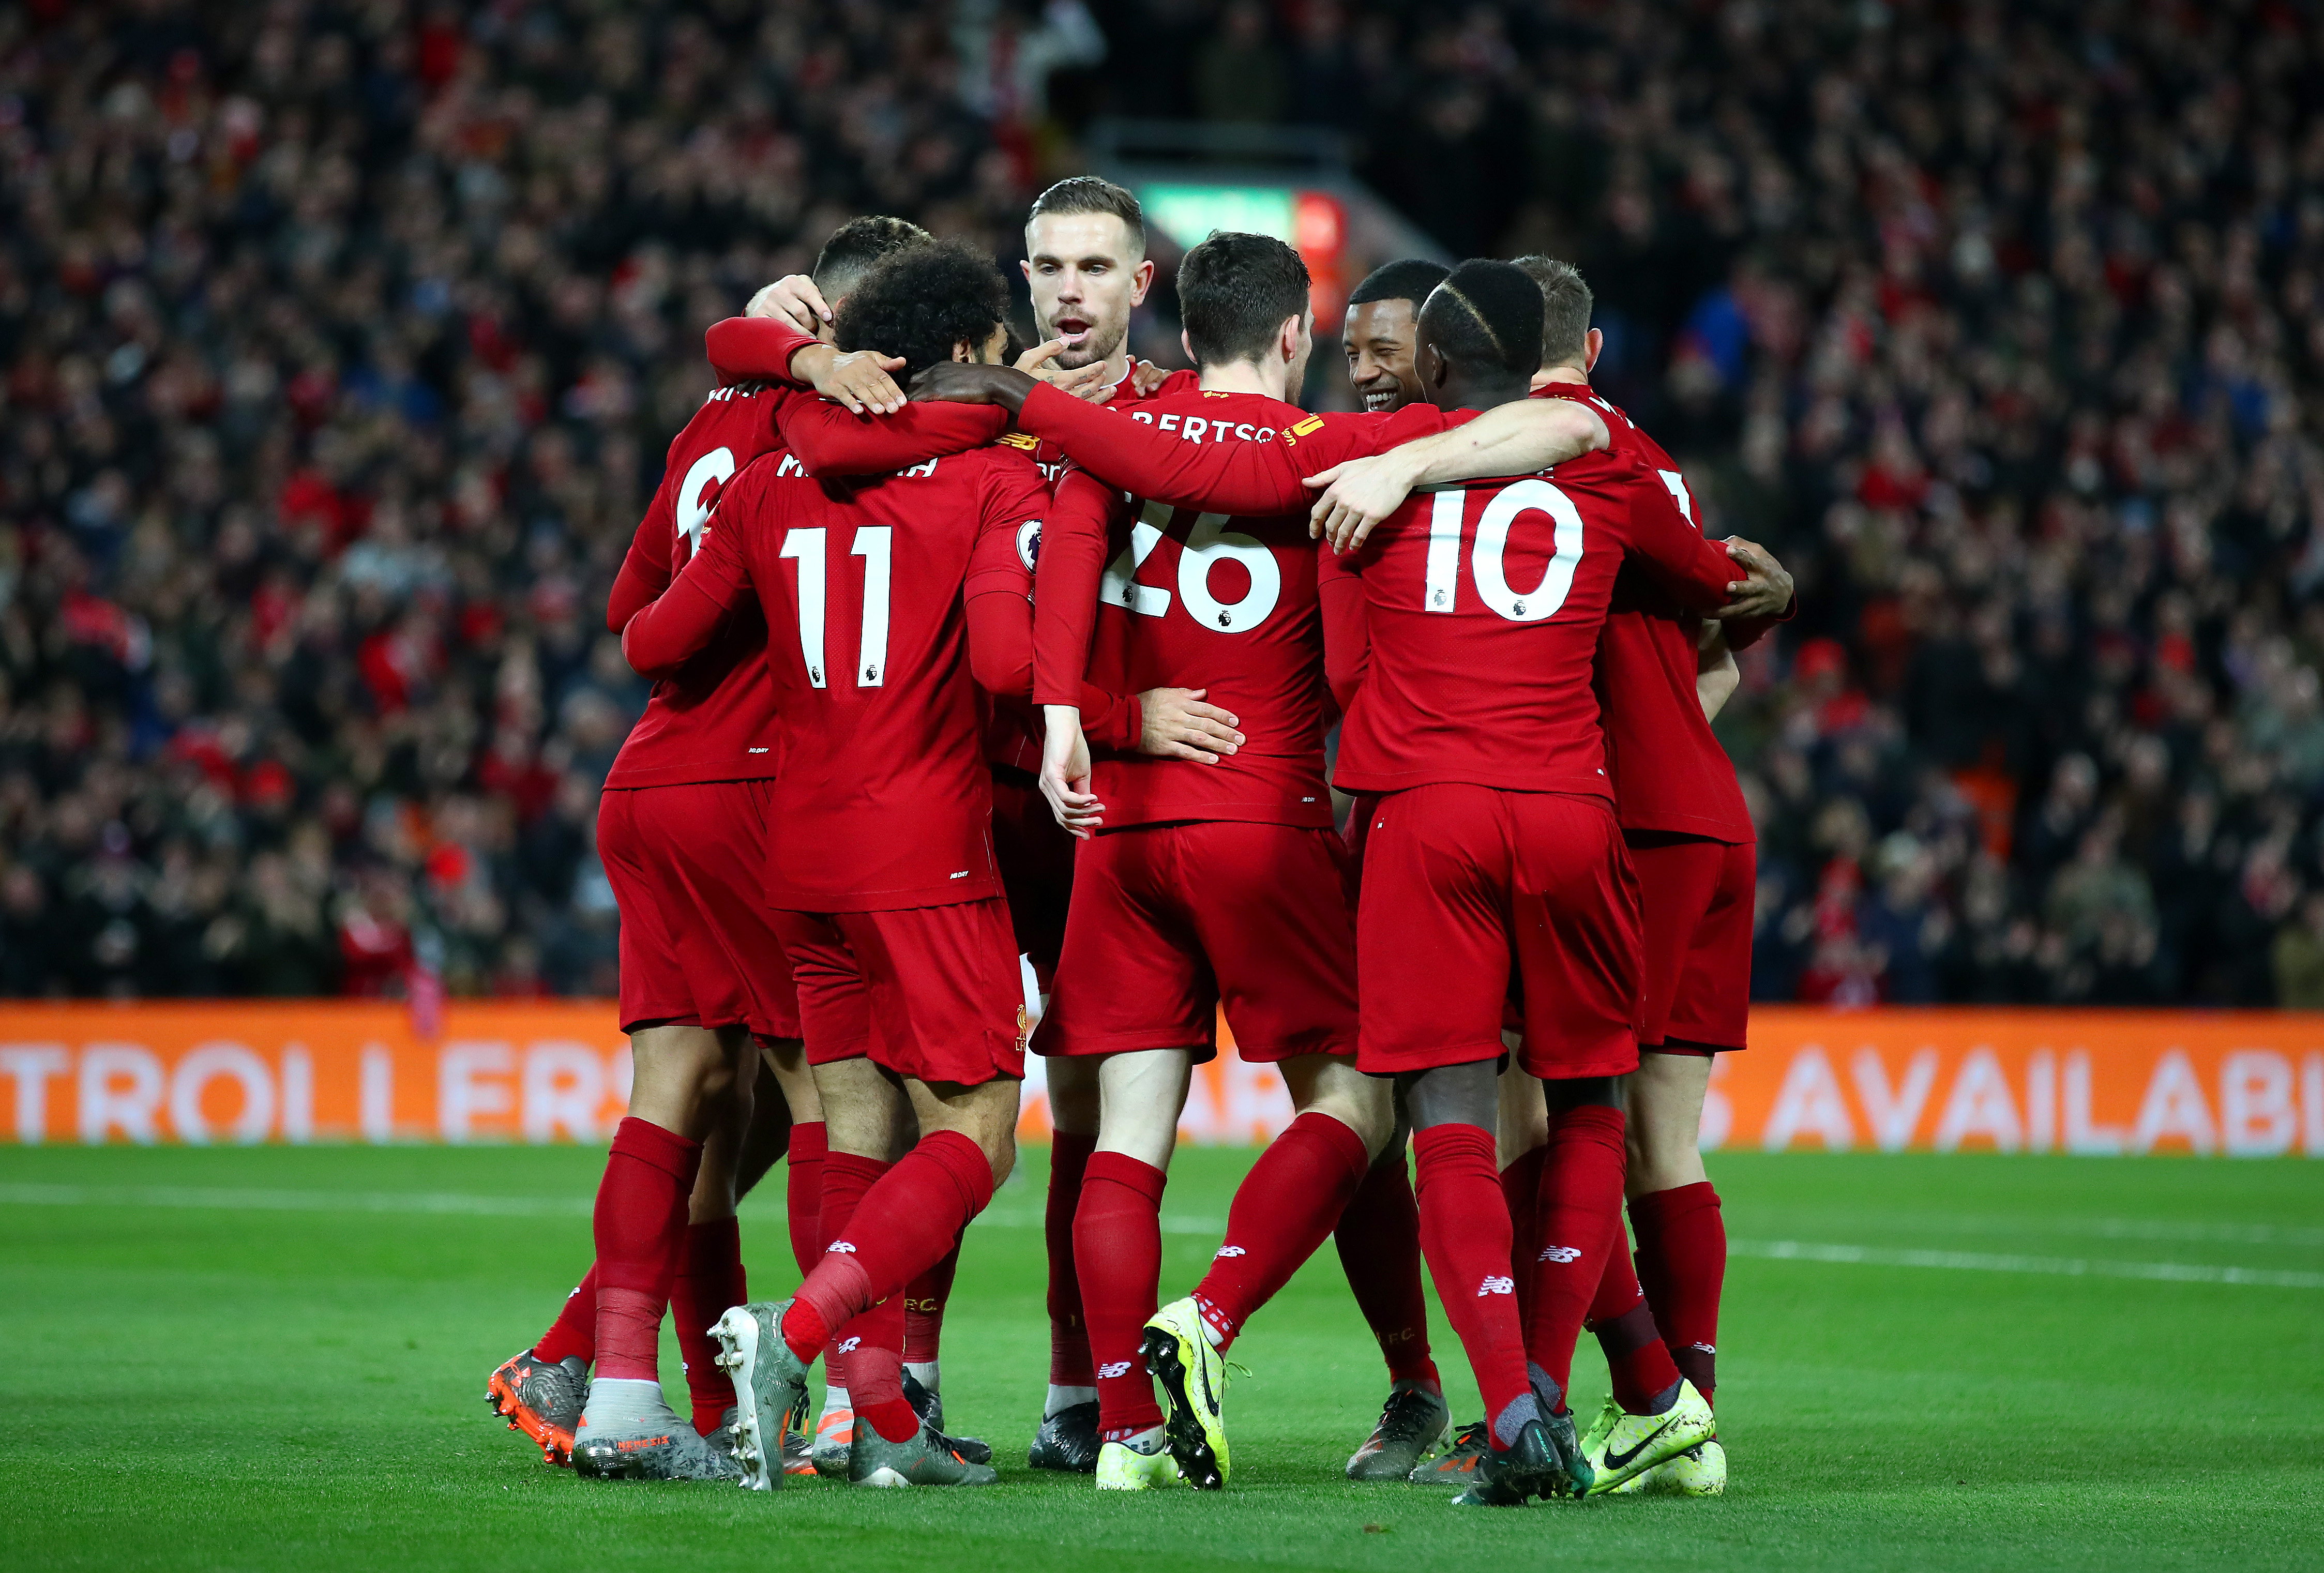 LIVERPOOL, ENGLAND - JANUARY 02: Mohamed Salah of Liverpool celebrates with his team mates after scoring his team's first goal during the Premier League match between Liverpool FC and Sheffield United at Anfield on January 02, 2020 in Liverpool, United Kingdom. (Photo by Clive Brunskill/Getty Images)